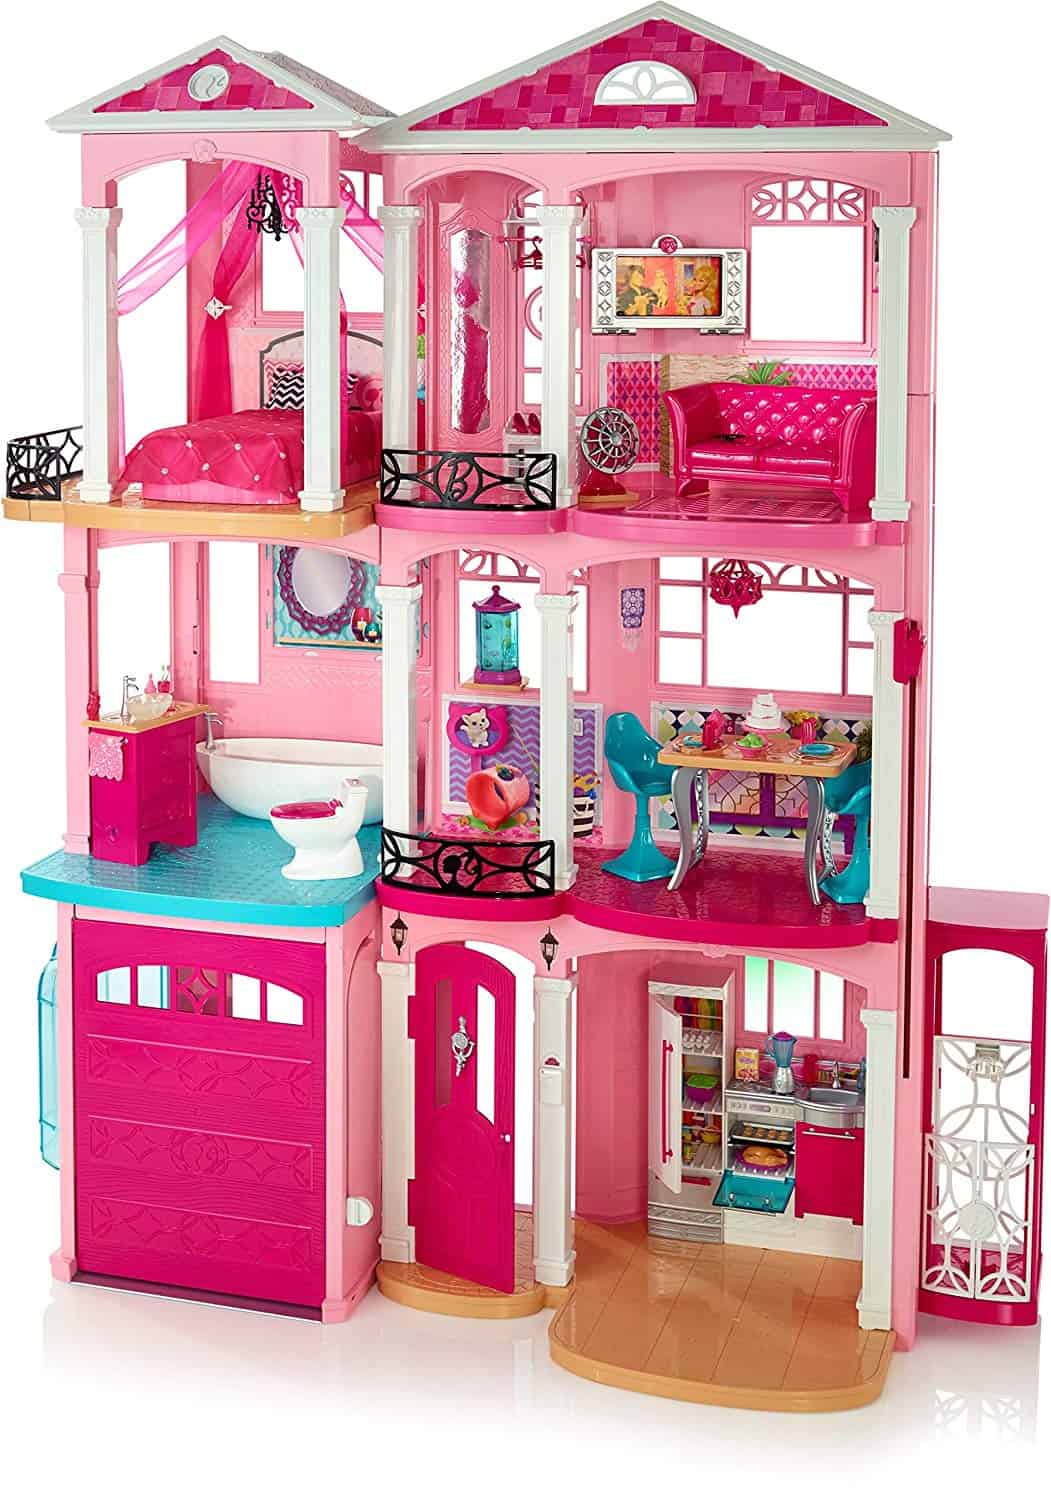 Barbie Girls Dollhouse Kids Playhouse Tall Furniture Wooden Doll House Role Play 